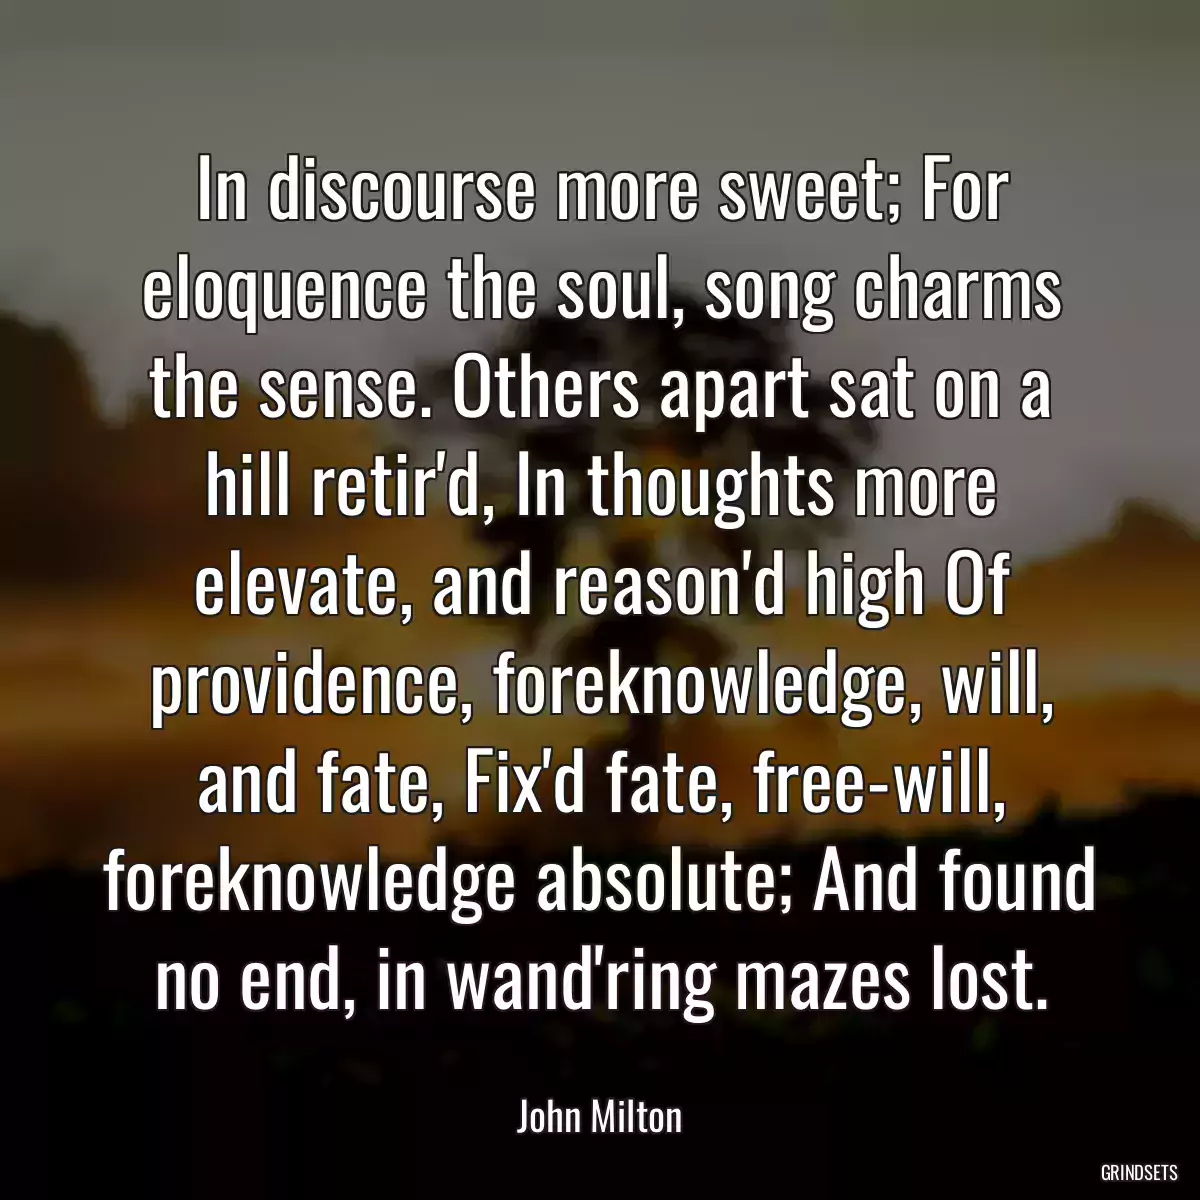 In discourse more sweet; For eloquence the soul, song charms the sense. Others apart sat on a hill retir\'d, In thoughts more elevate, and reason\'d high Of providence, foreknowledge, will, and fate, Fix\'d fate, free-will, foreknowledge absolute; And found no end, in wand\'ring mazes lost.